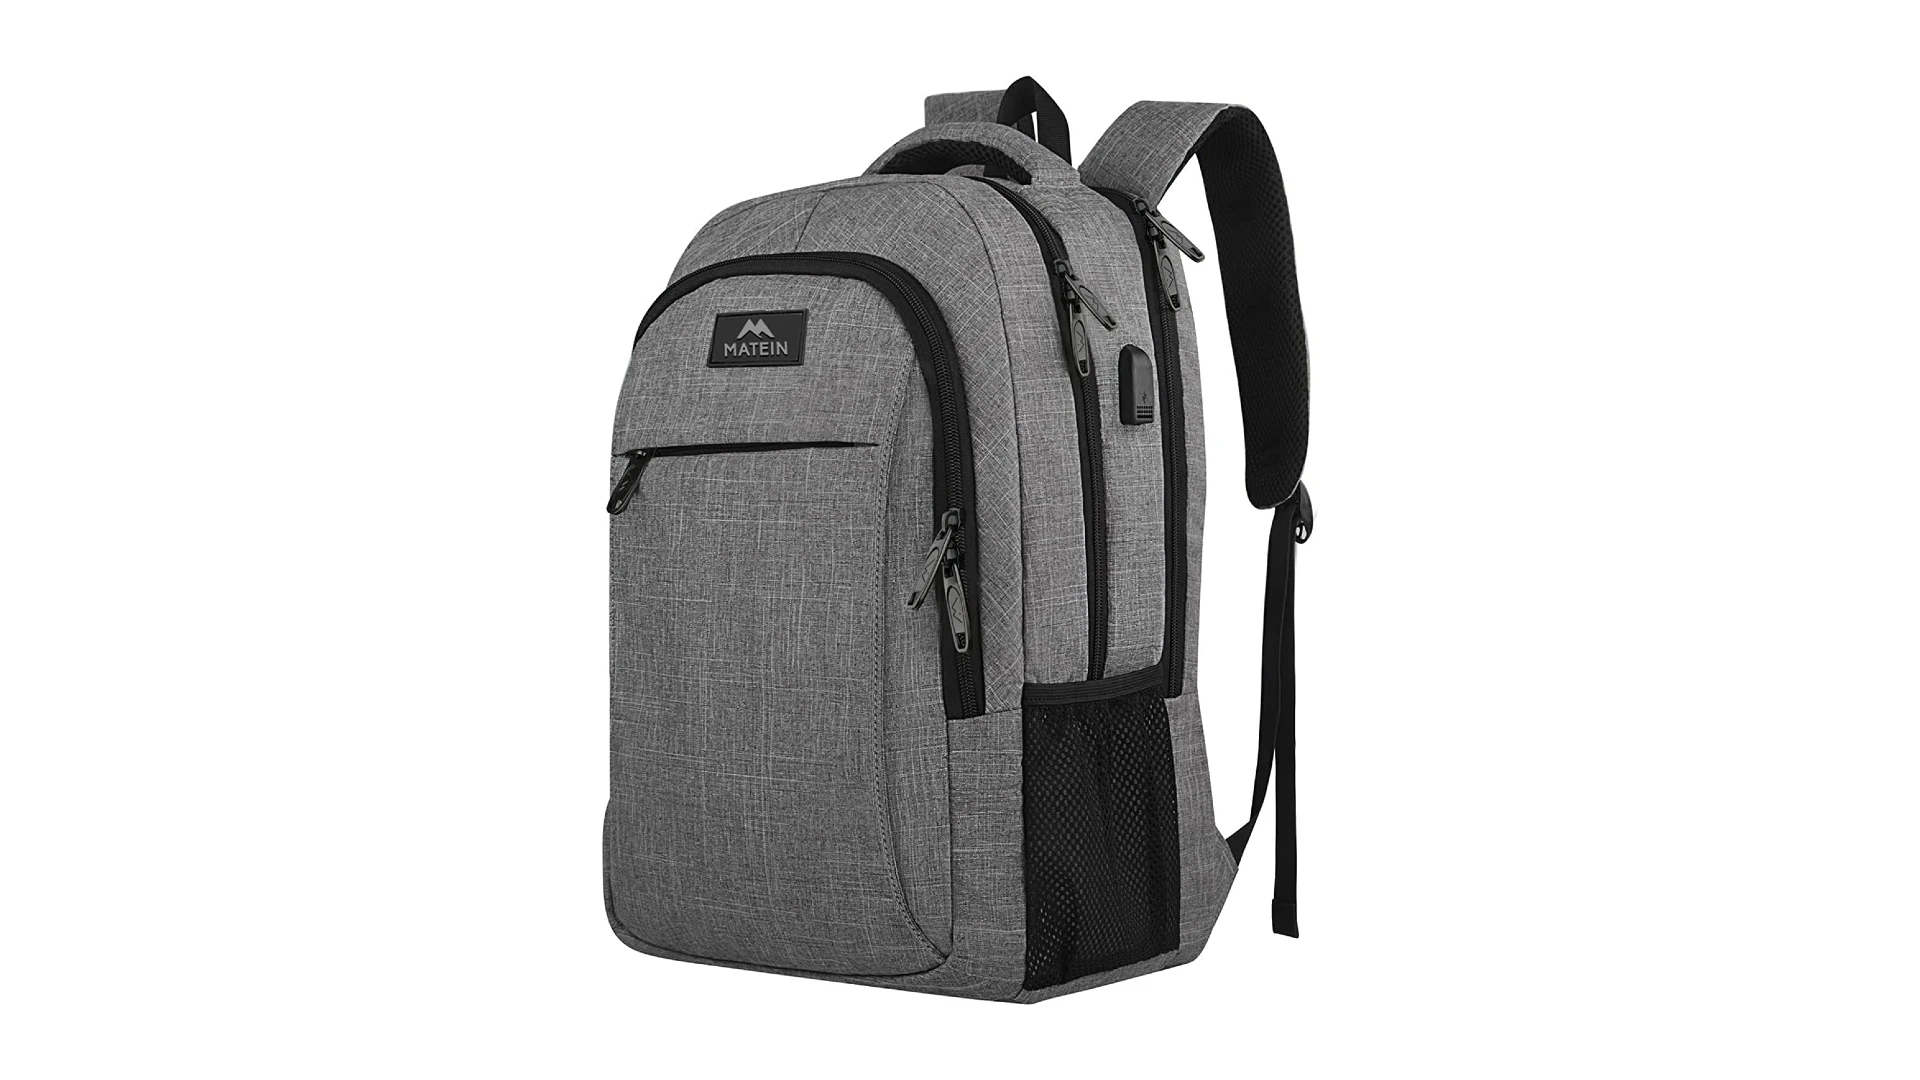 LAPTOP BACKPACK FOR TRAVELING